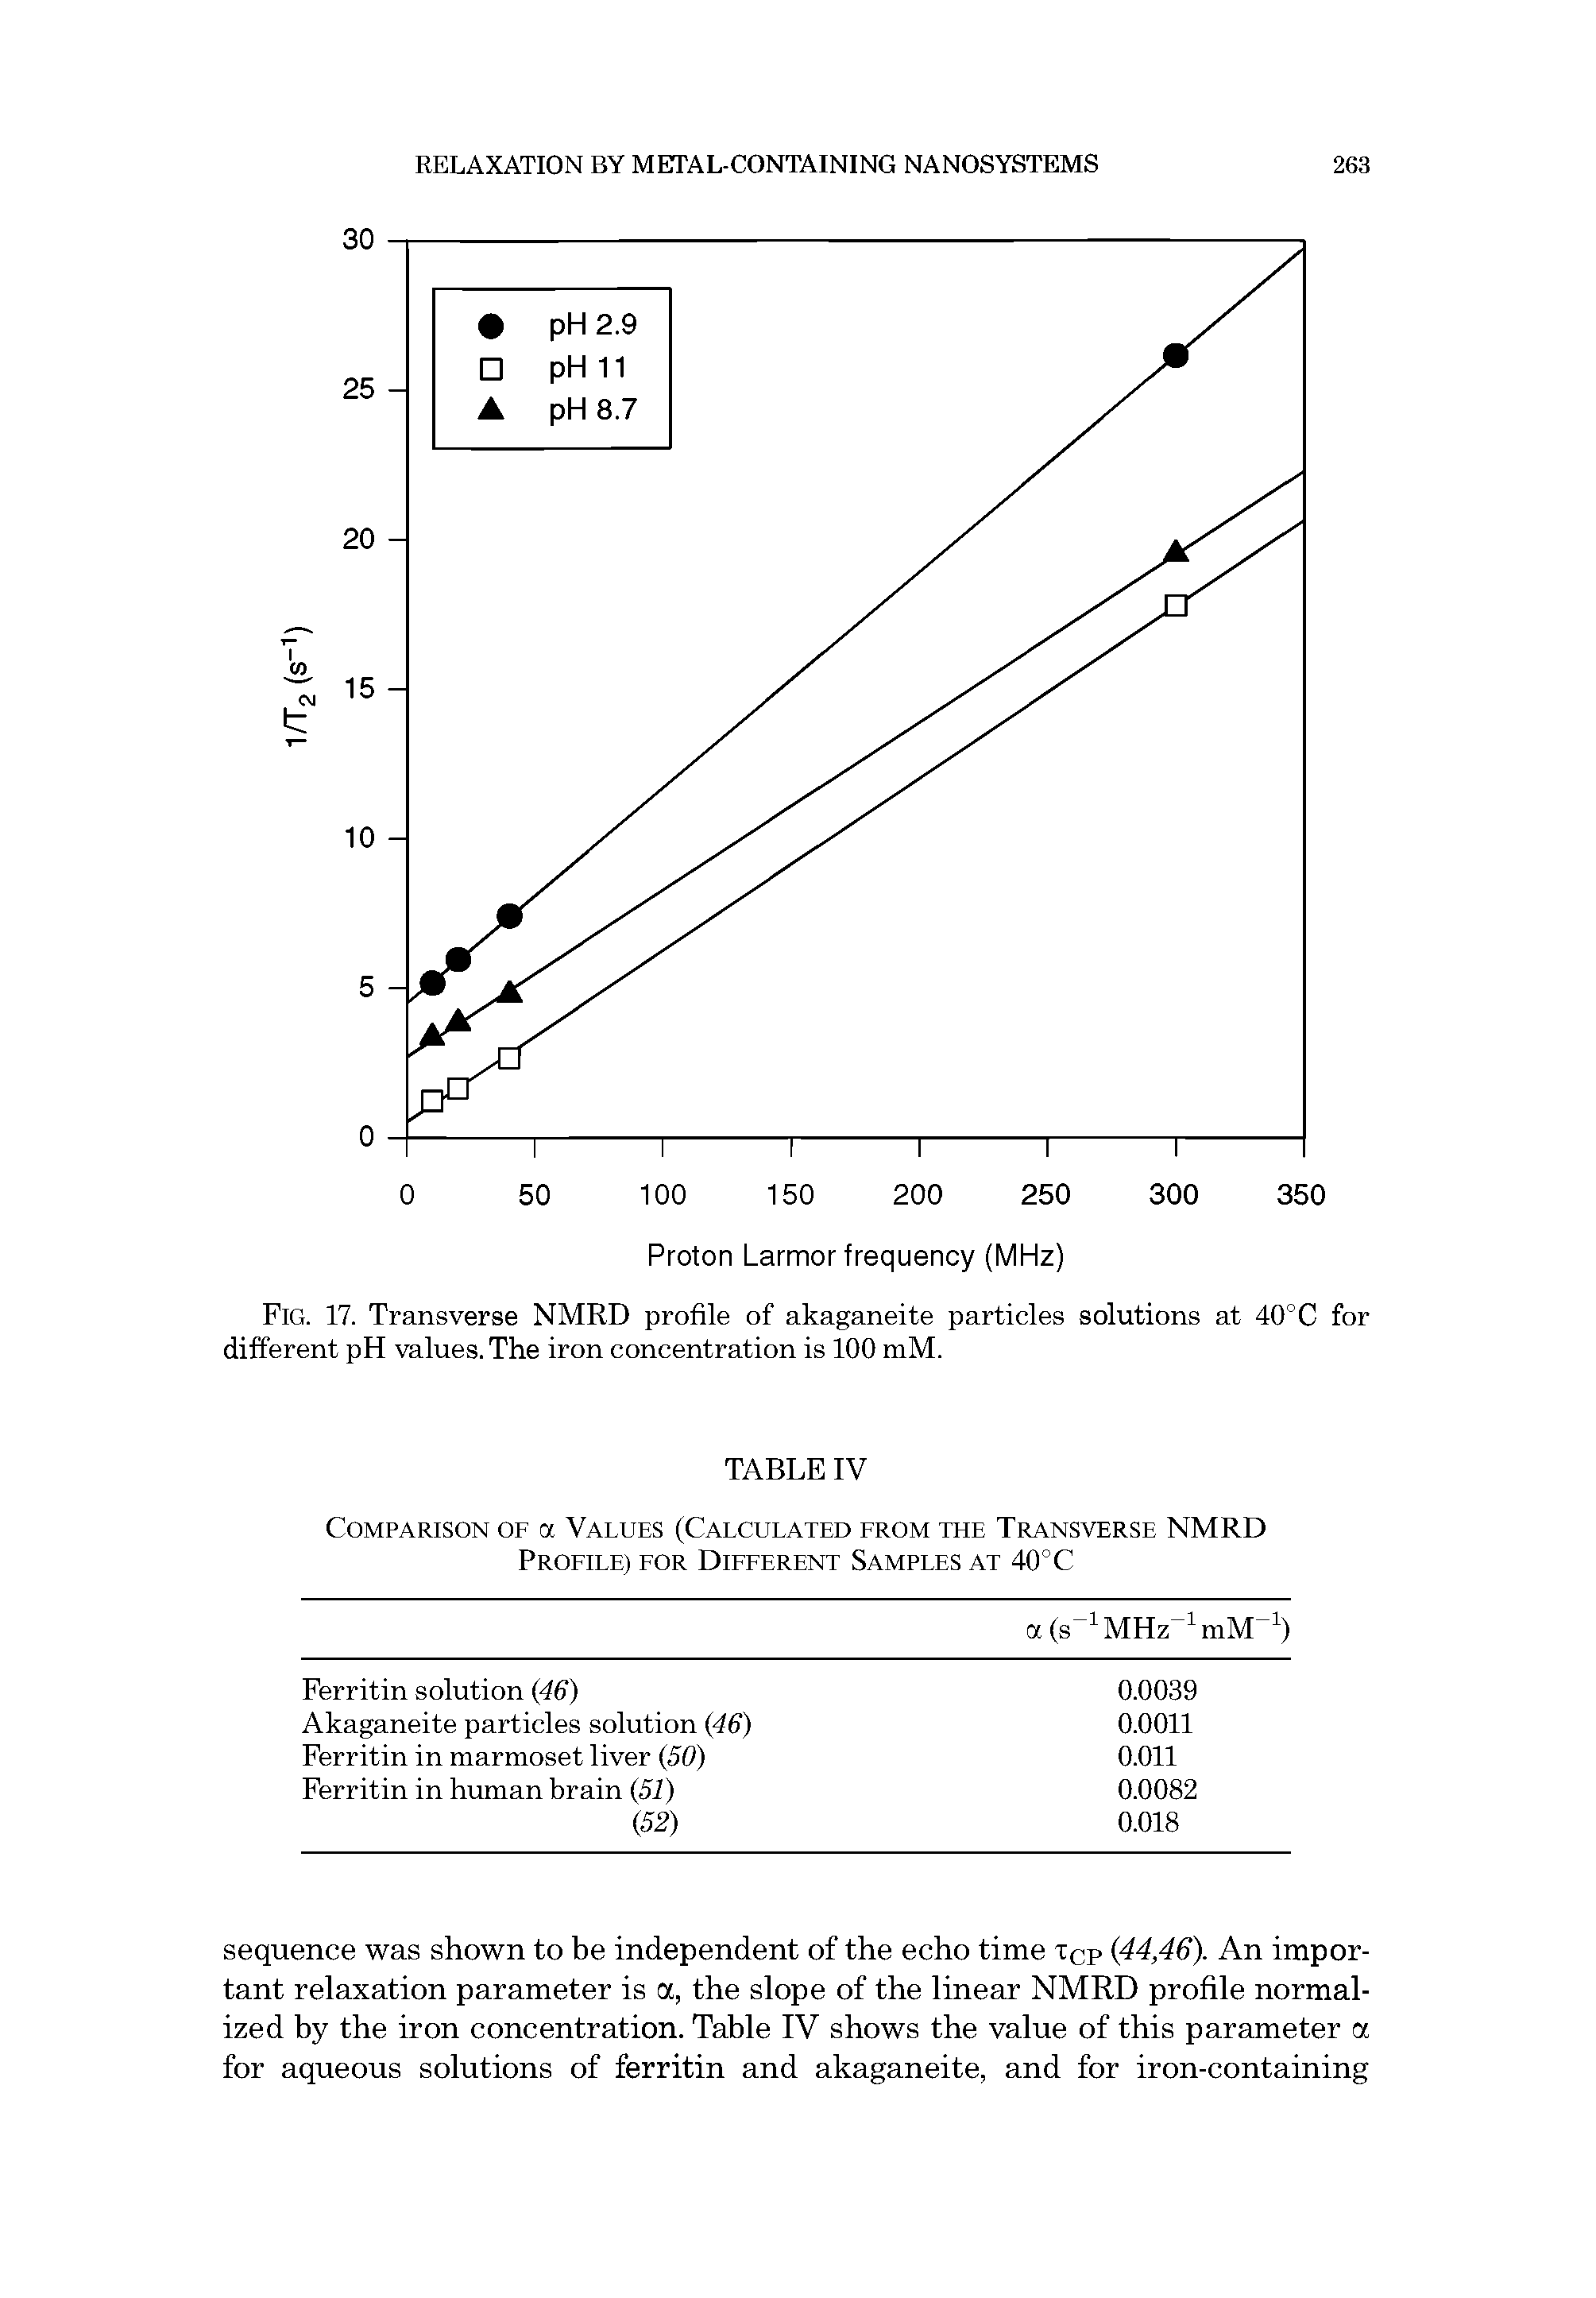 Fig. 17. Transverse NMRD profile of akaganeite particles solutions at 40°C for different pH values. The iron concentration is 100 mM.